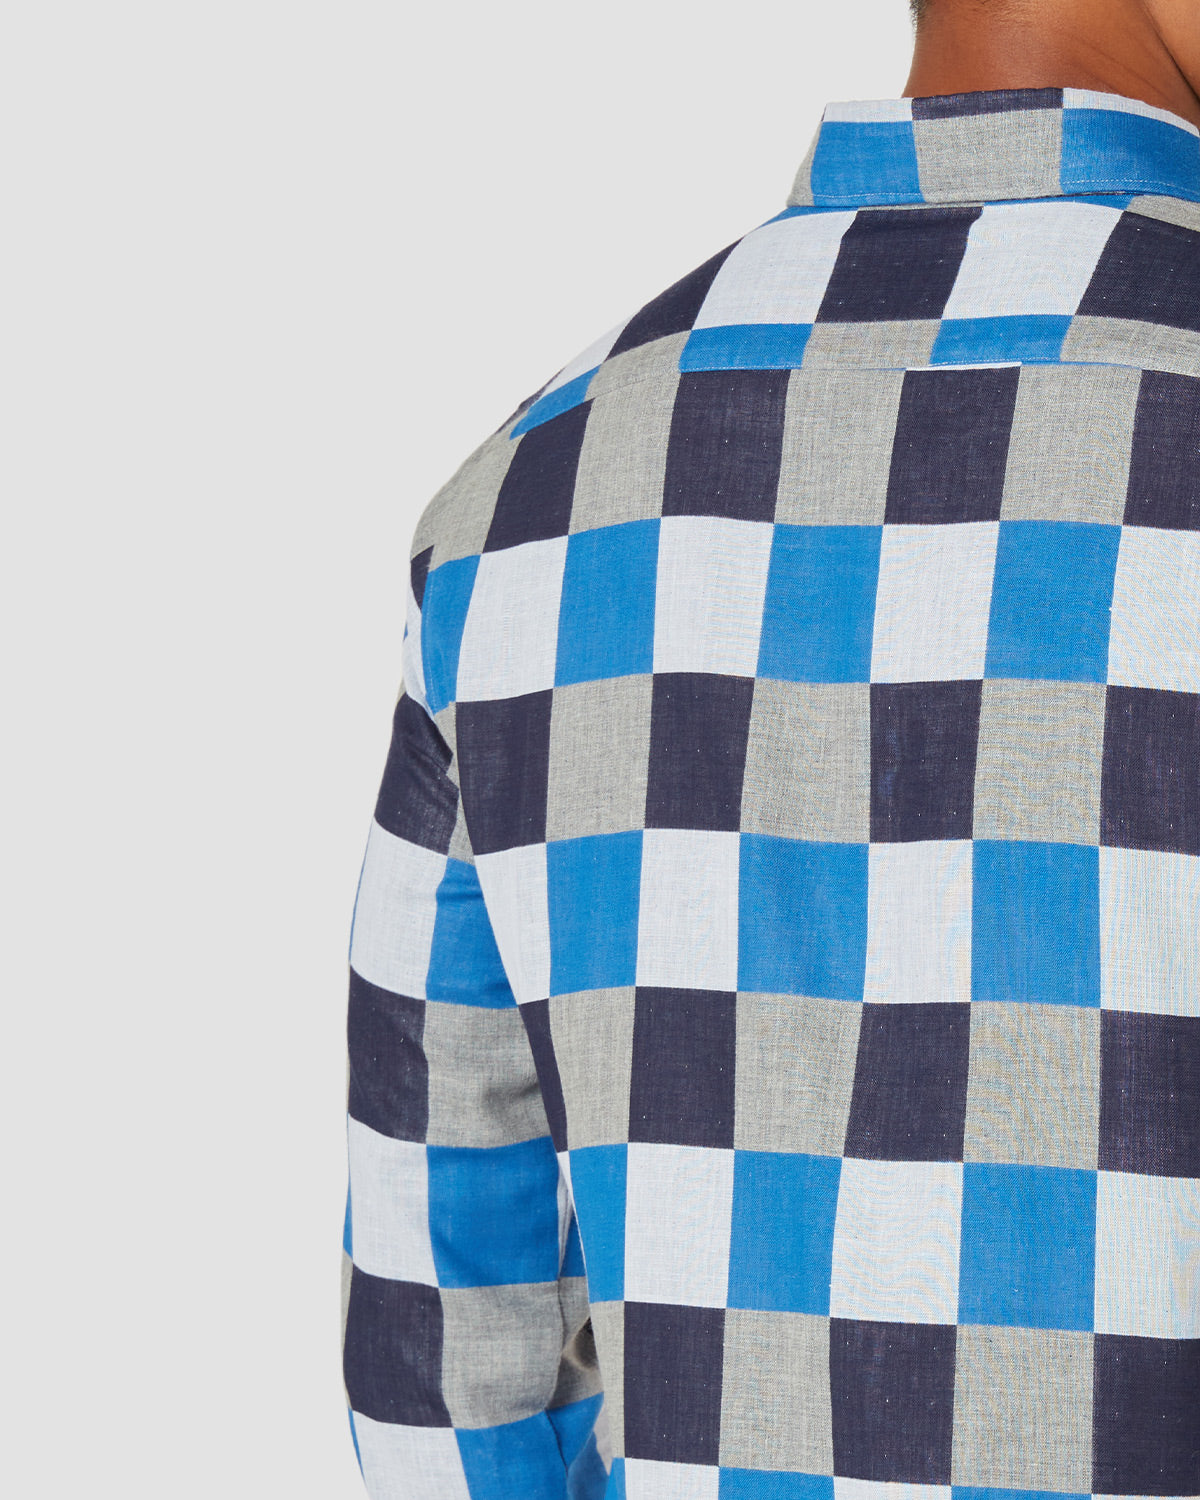 Japanese Colossal Checked Shirt